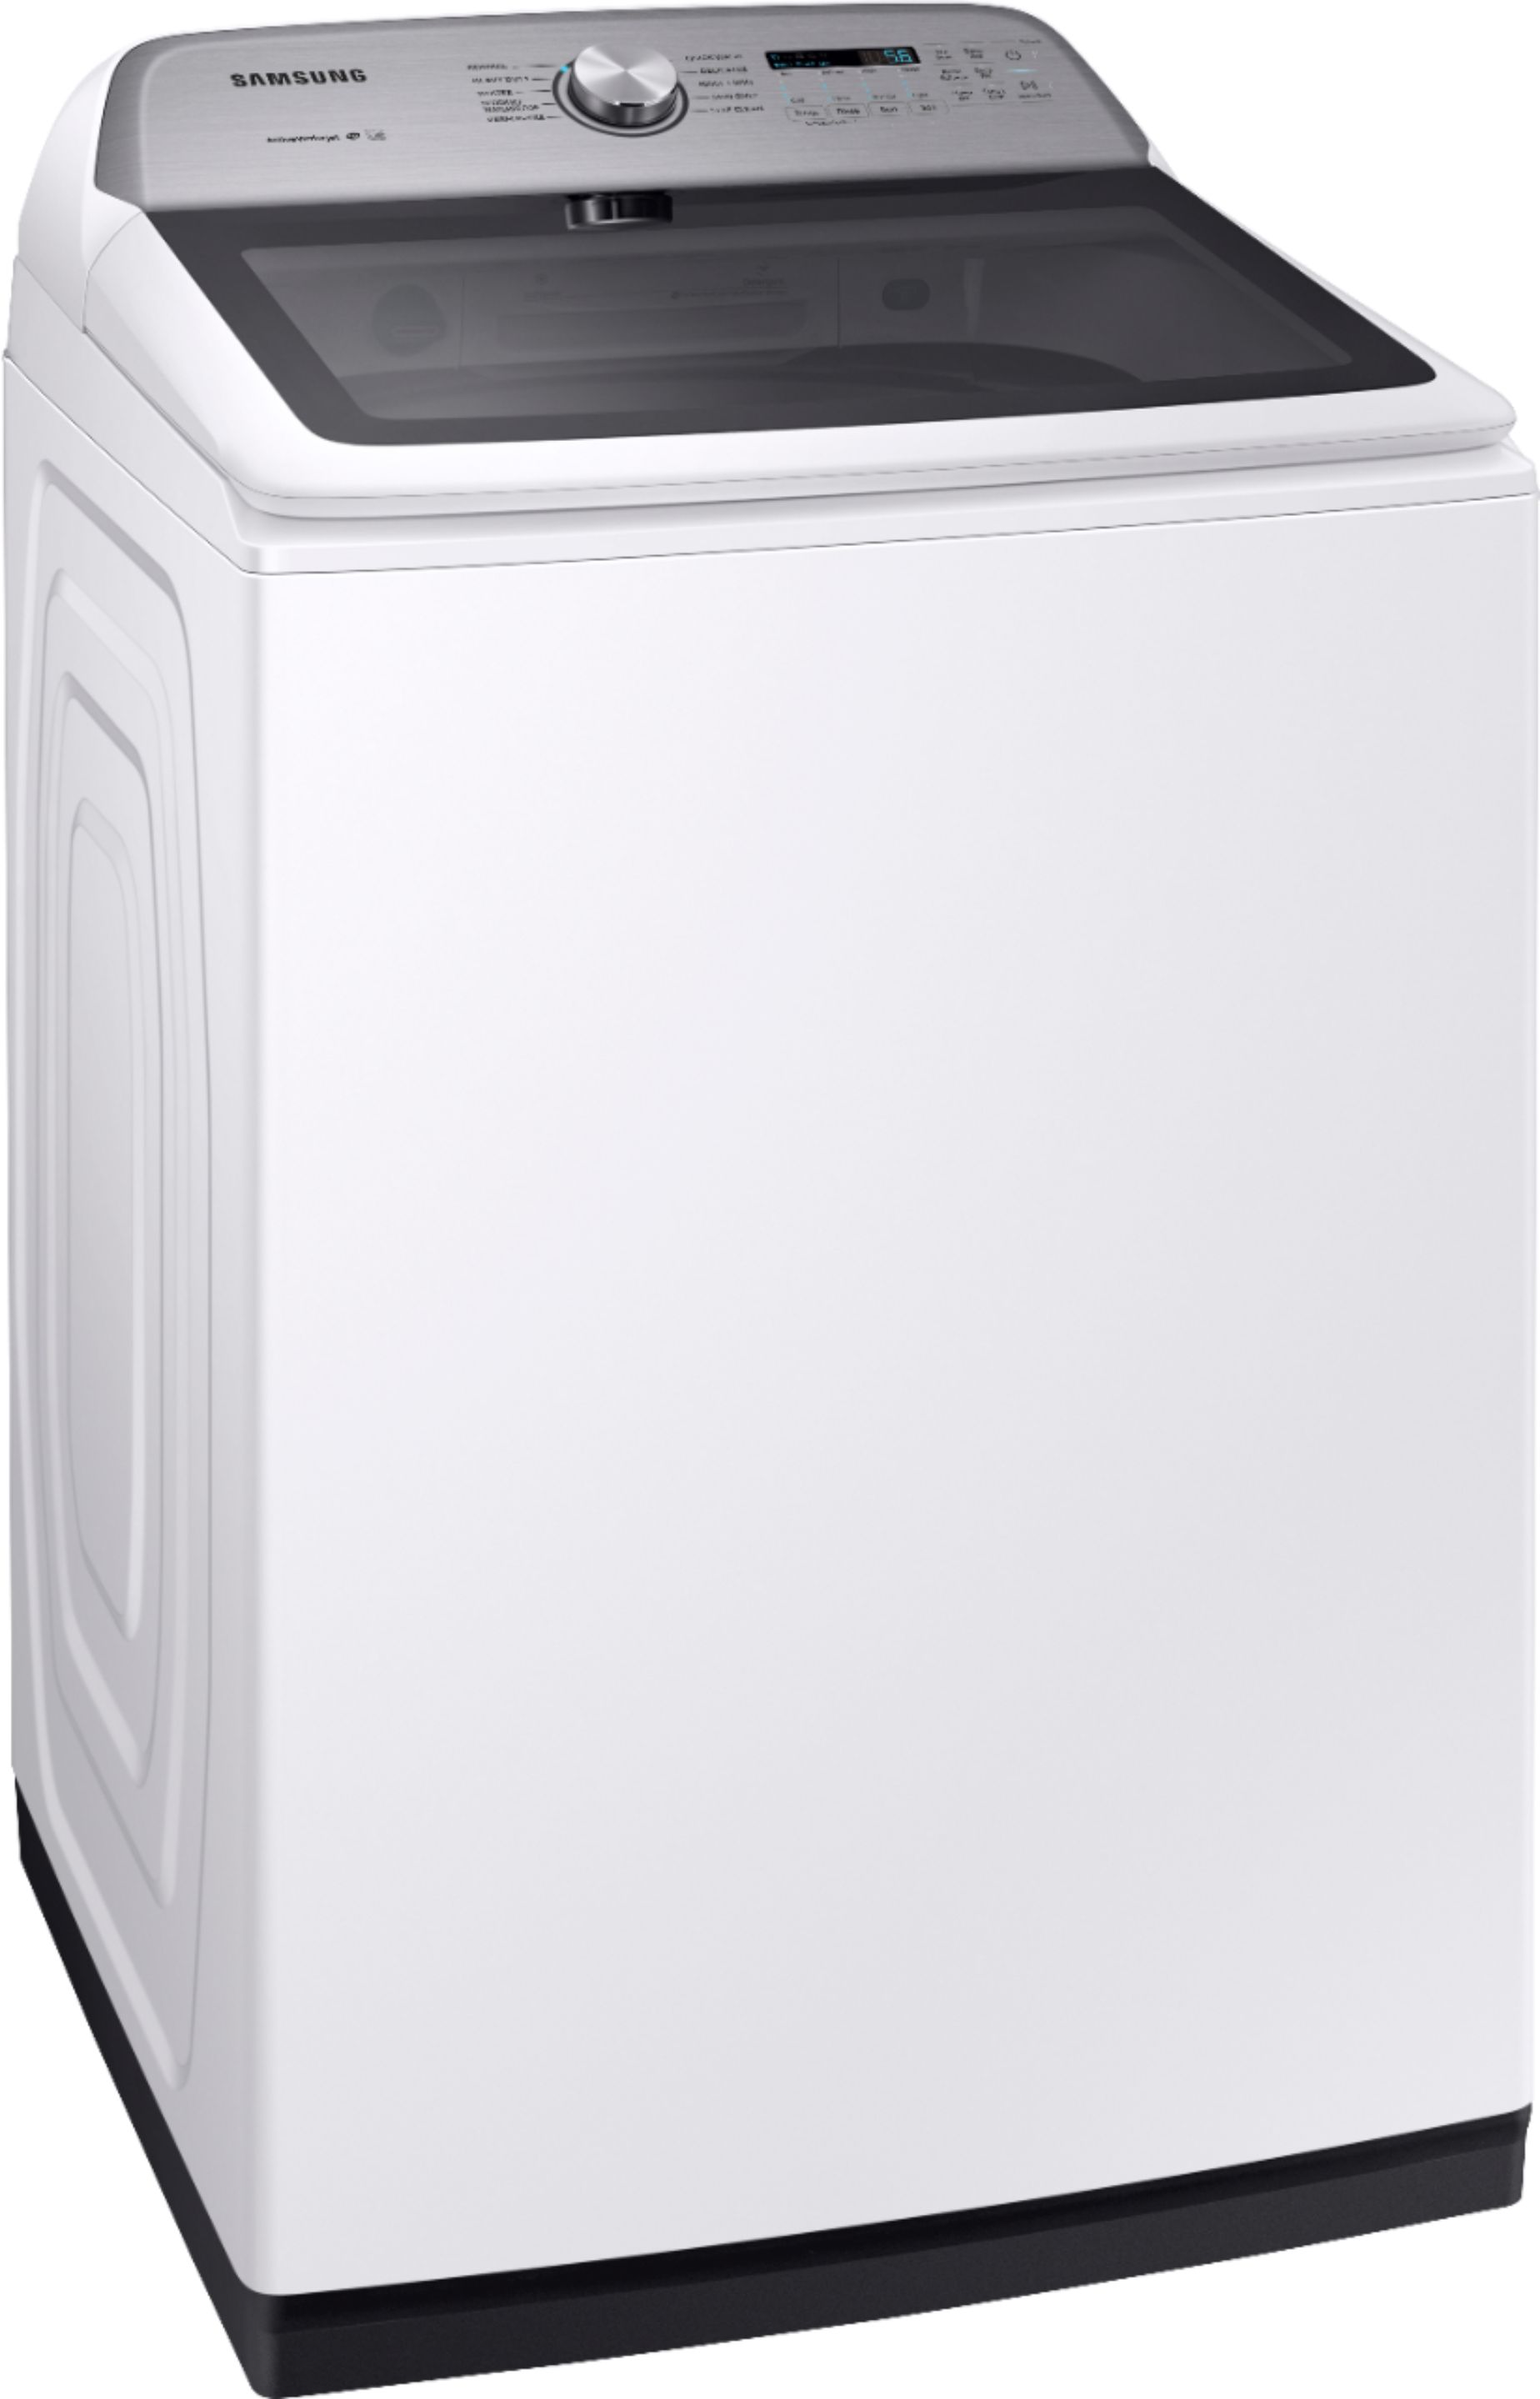 Angle View: Samsung - 5.4 Cu. Ft. High Efficiency Top Load Washer with Active WaterJet - White